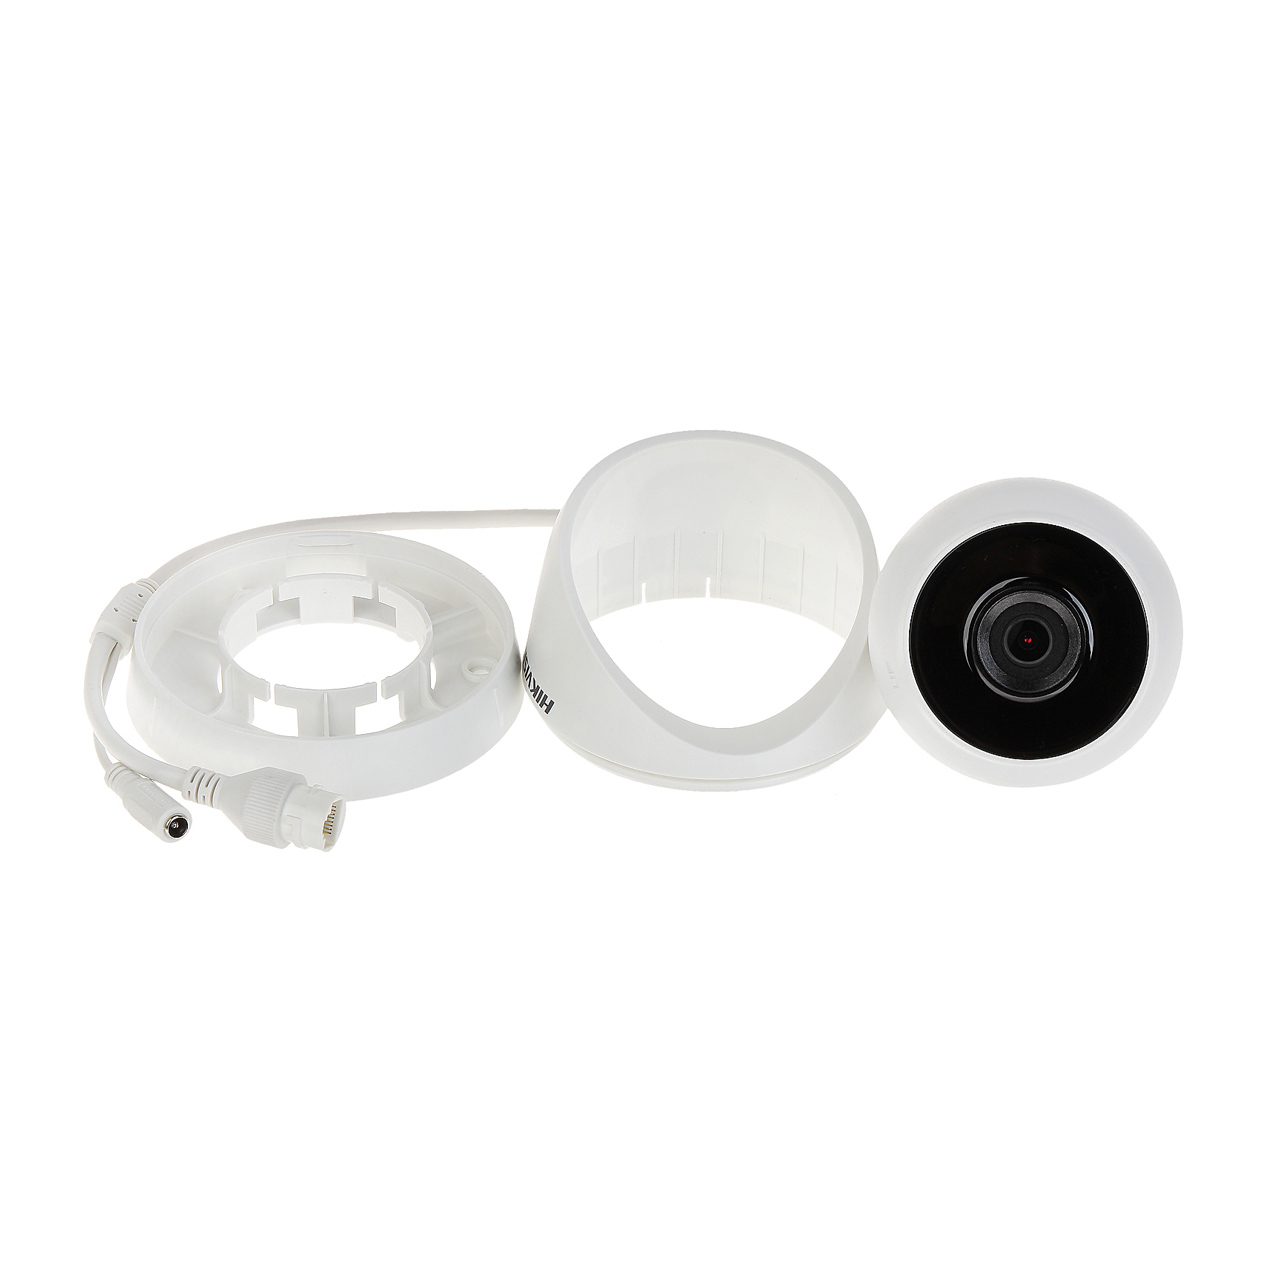 HIKVISION 2MP IR NETWORK DOME CAMERA DS-2CD1323G0-I